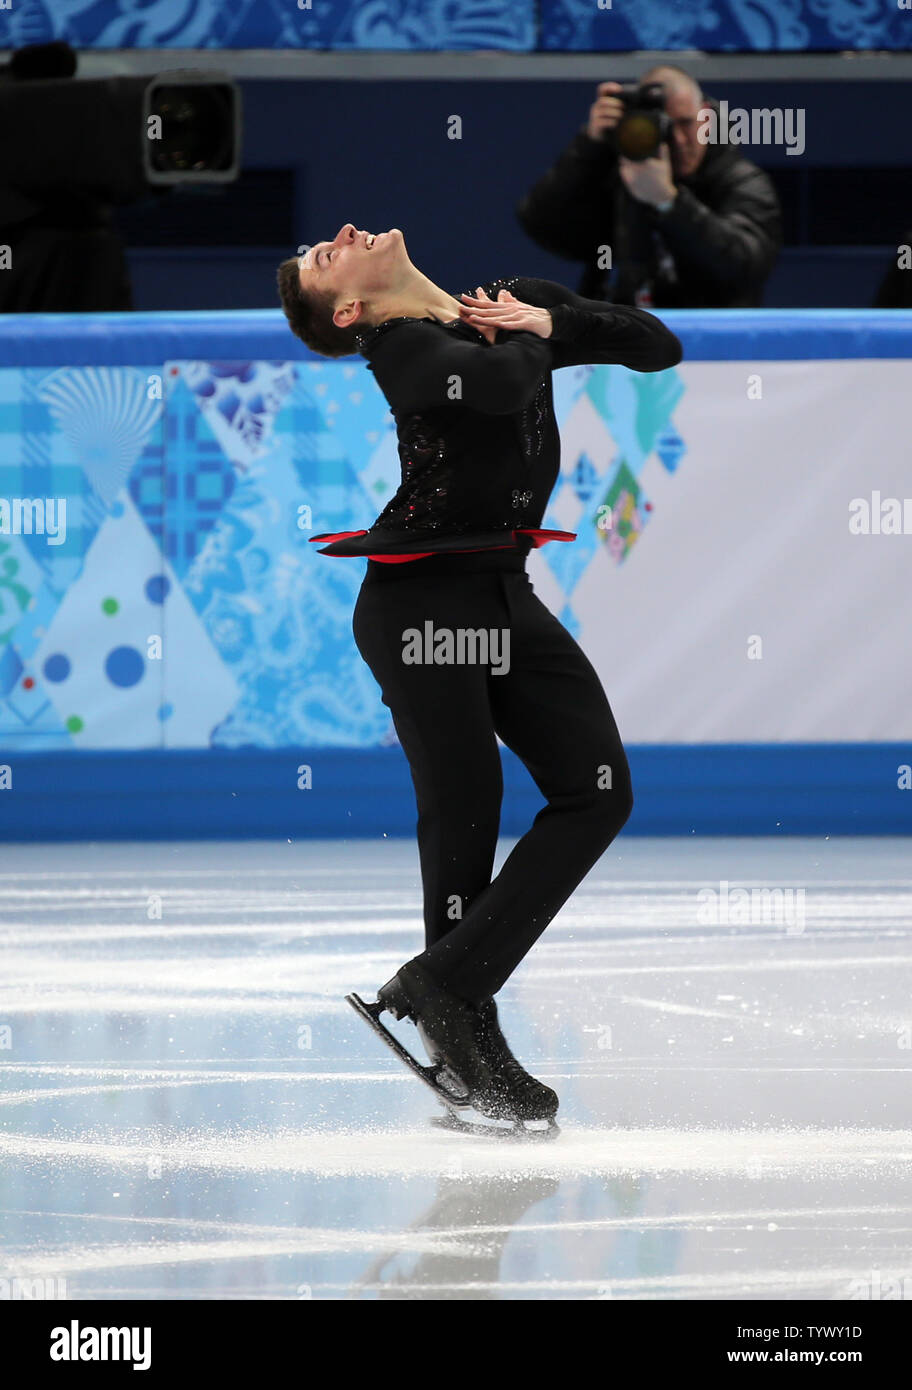 British Matthew Parr performs during the figure skating team's men short program competition as part of the Winter Olympics Games in Sochi, Russia on February 6, 2014. Team figure skating made its debut at the Olympics today, an event held a day before the official opening ceremony. UPI/Maya Vidon-White Stock Photo